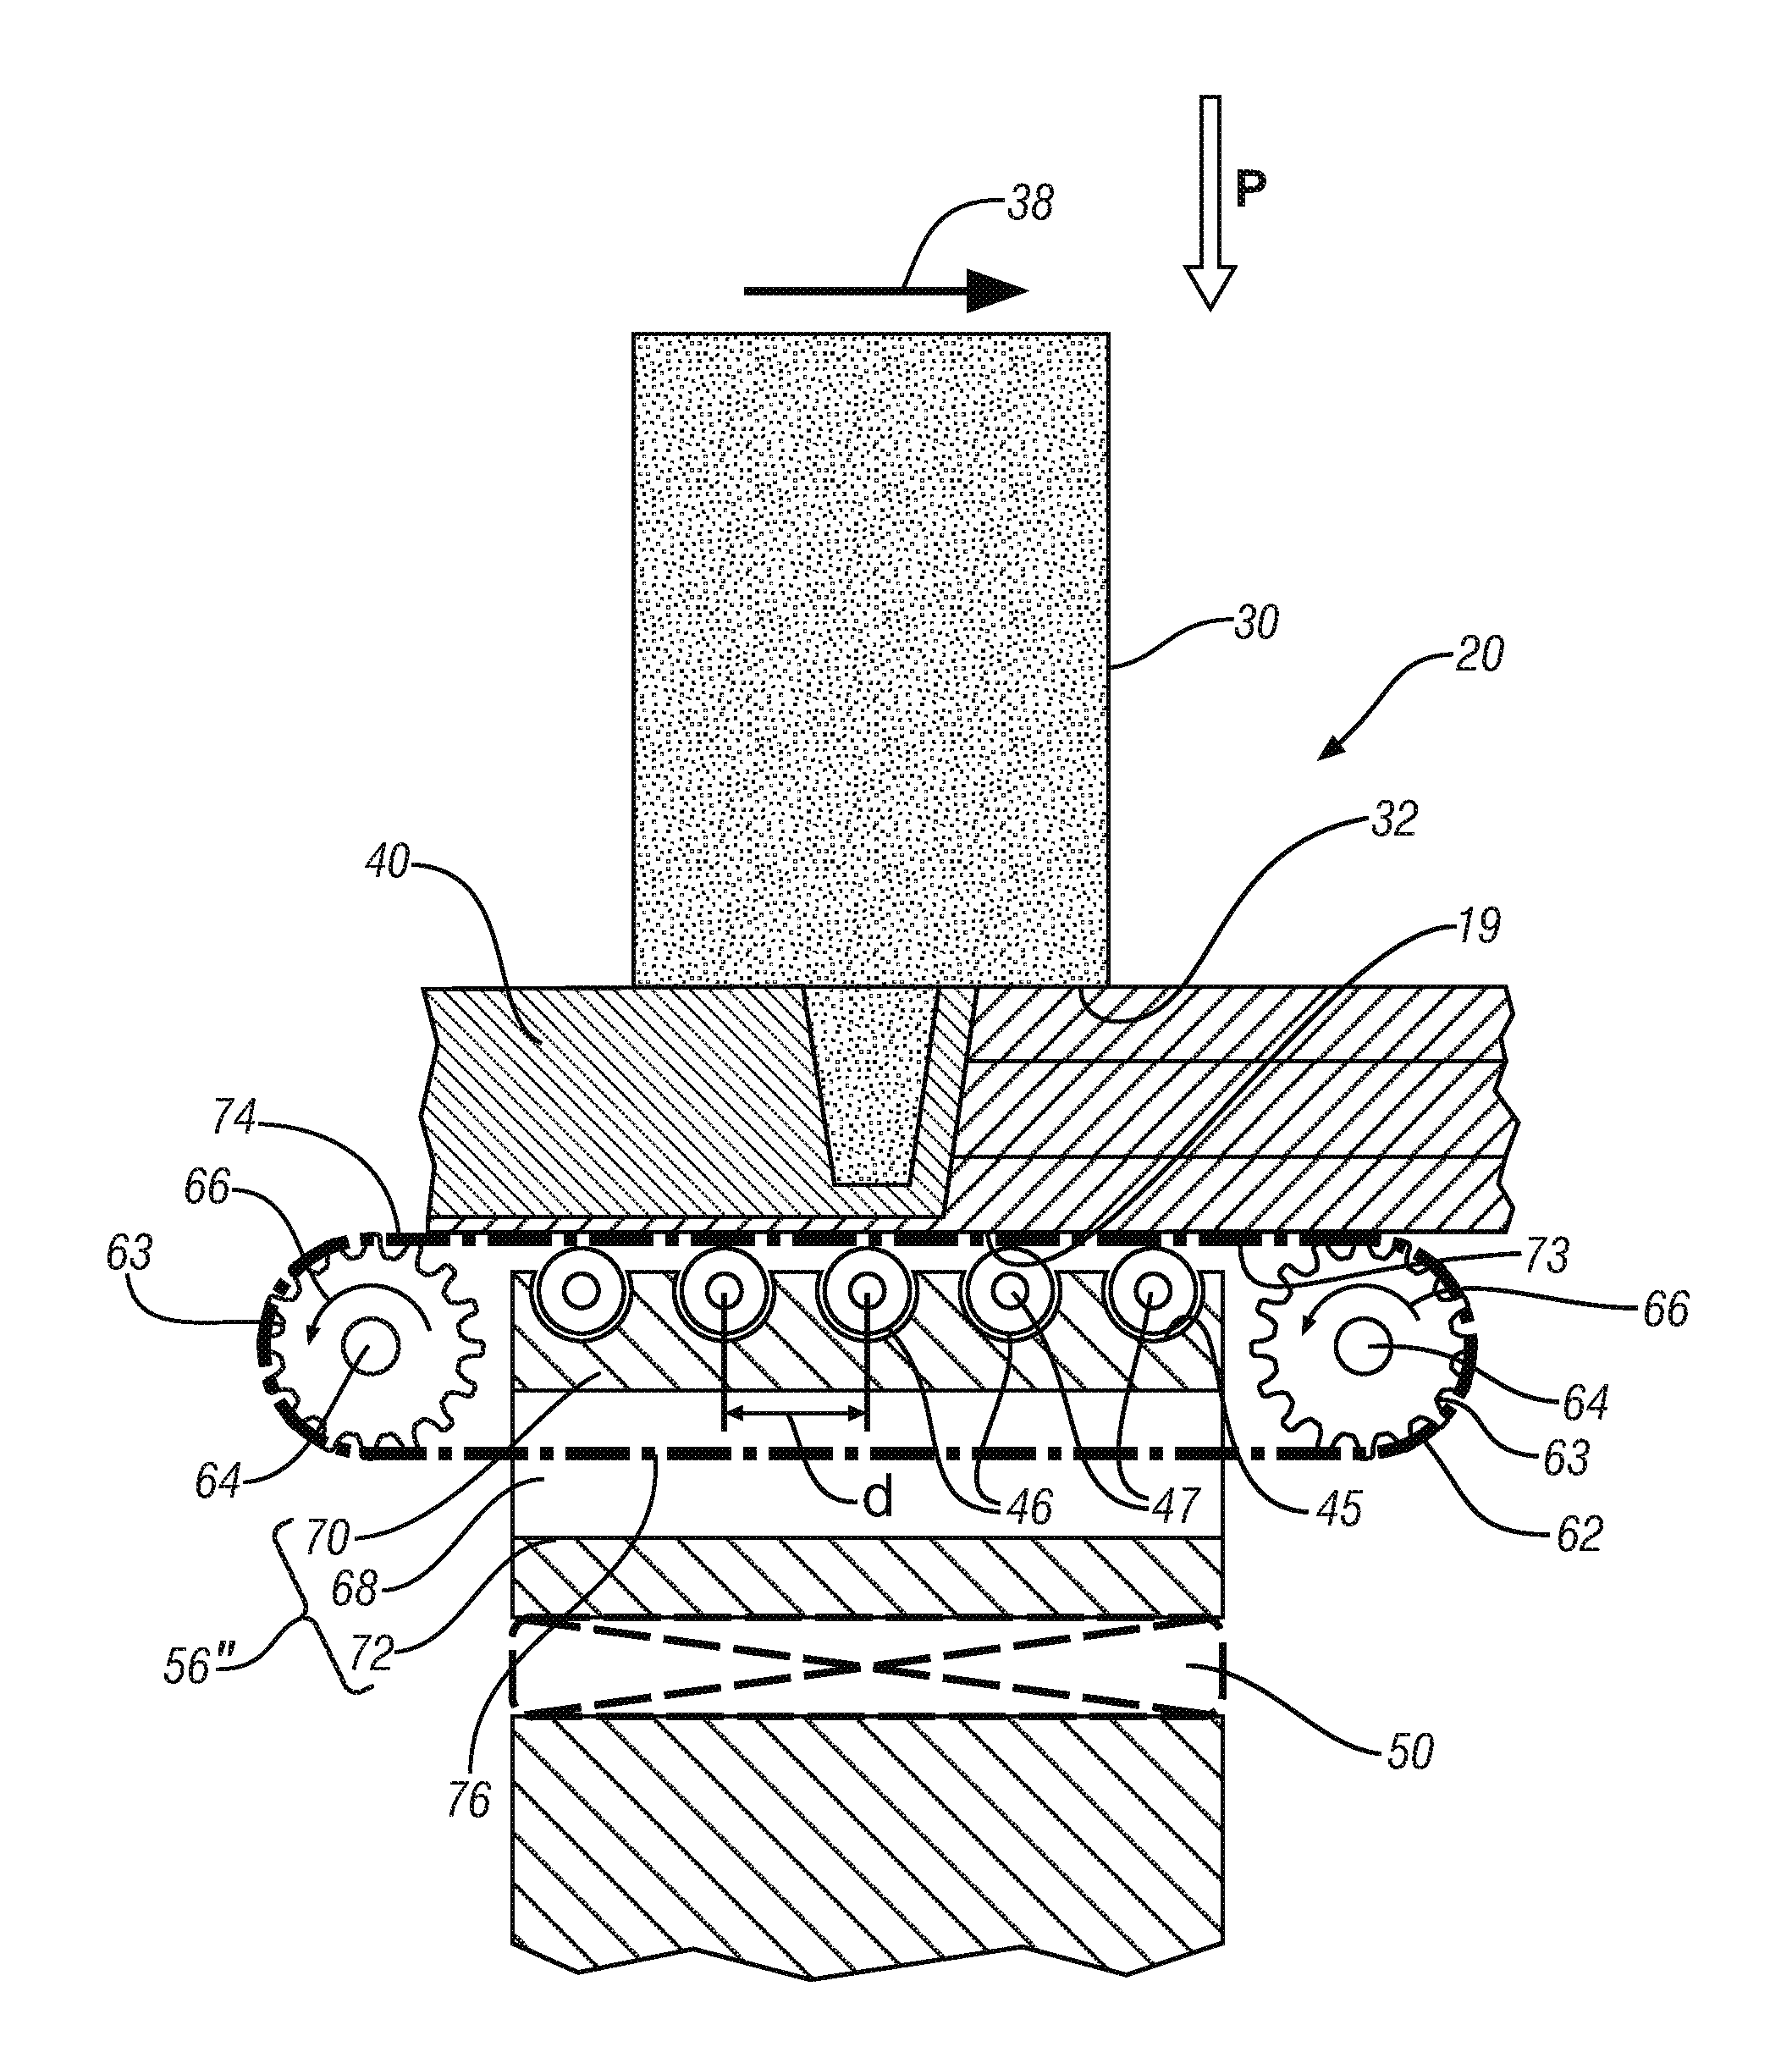 Anvil with rolling elements for friction stir welding